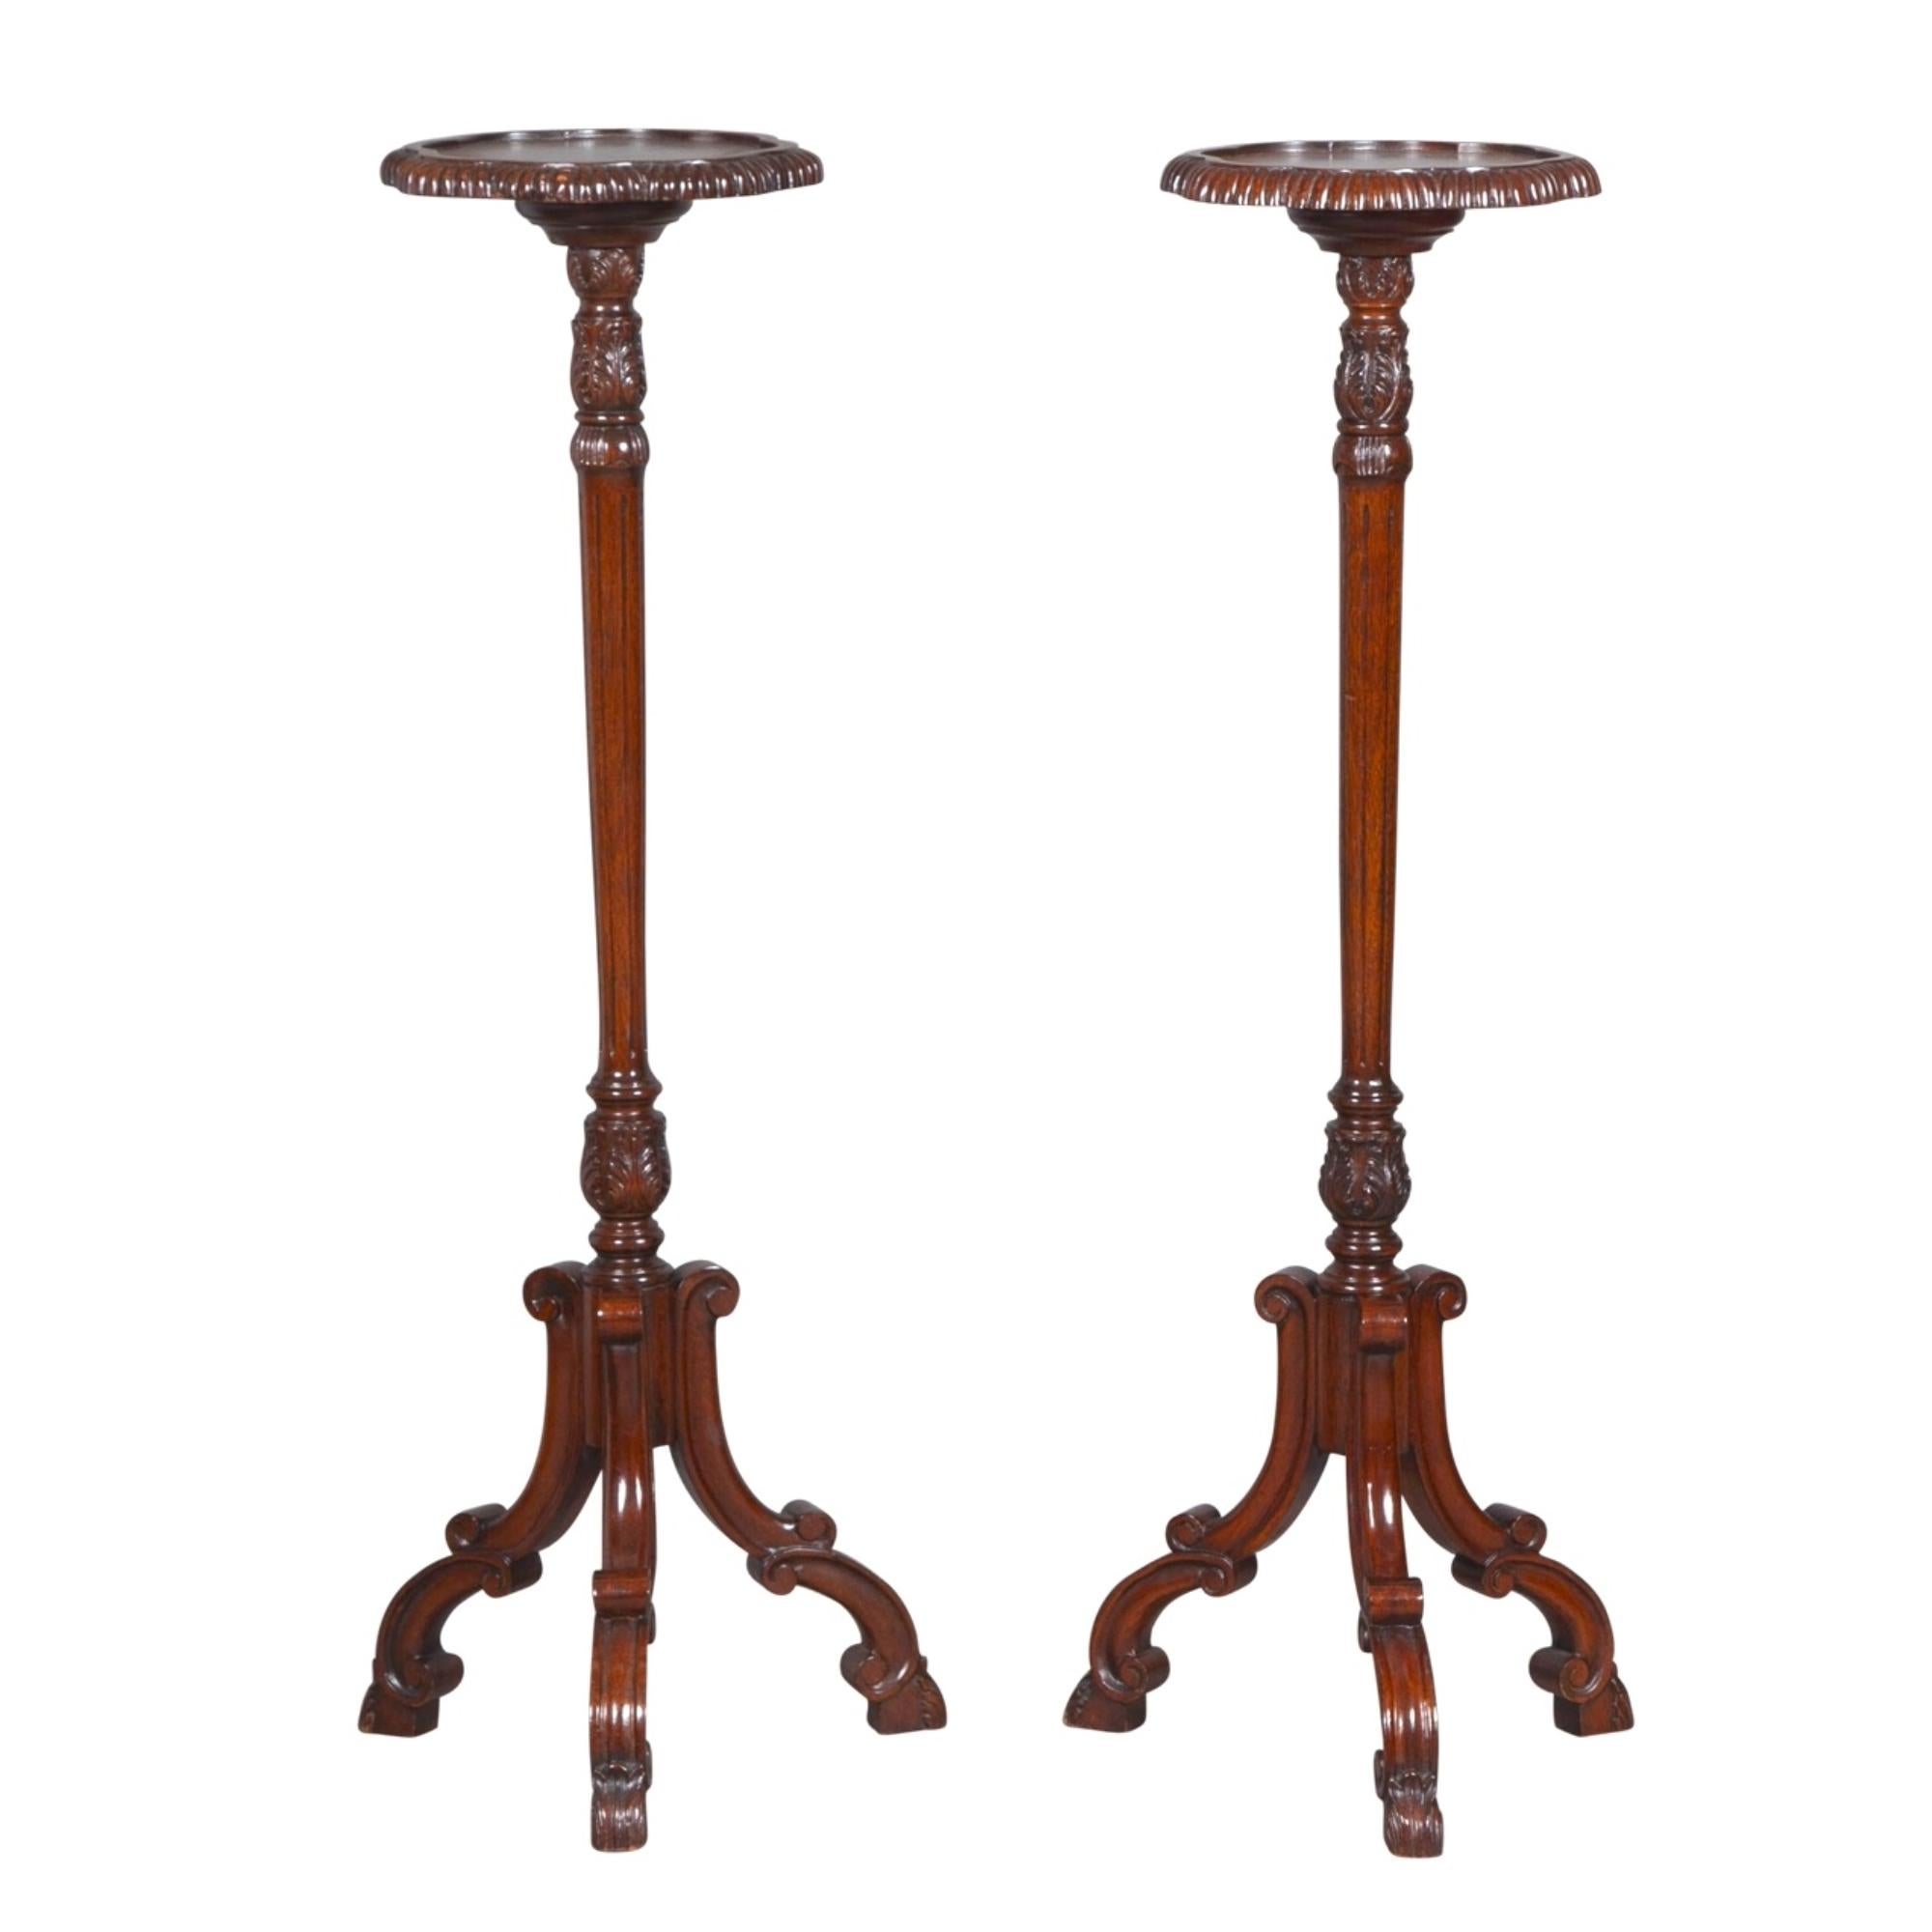 19th Century English Chippendale Style Pair Tripod Foot Candle Stand / Pedestal For Sale 2